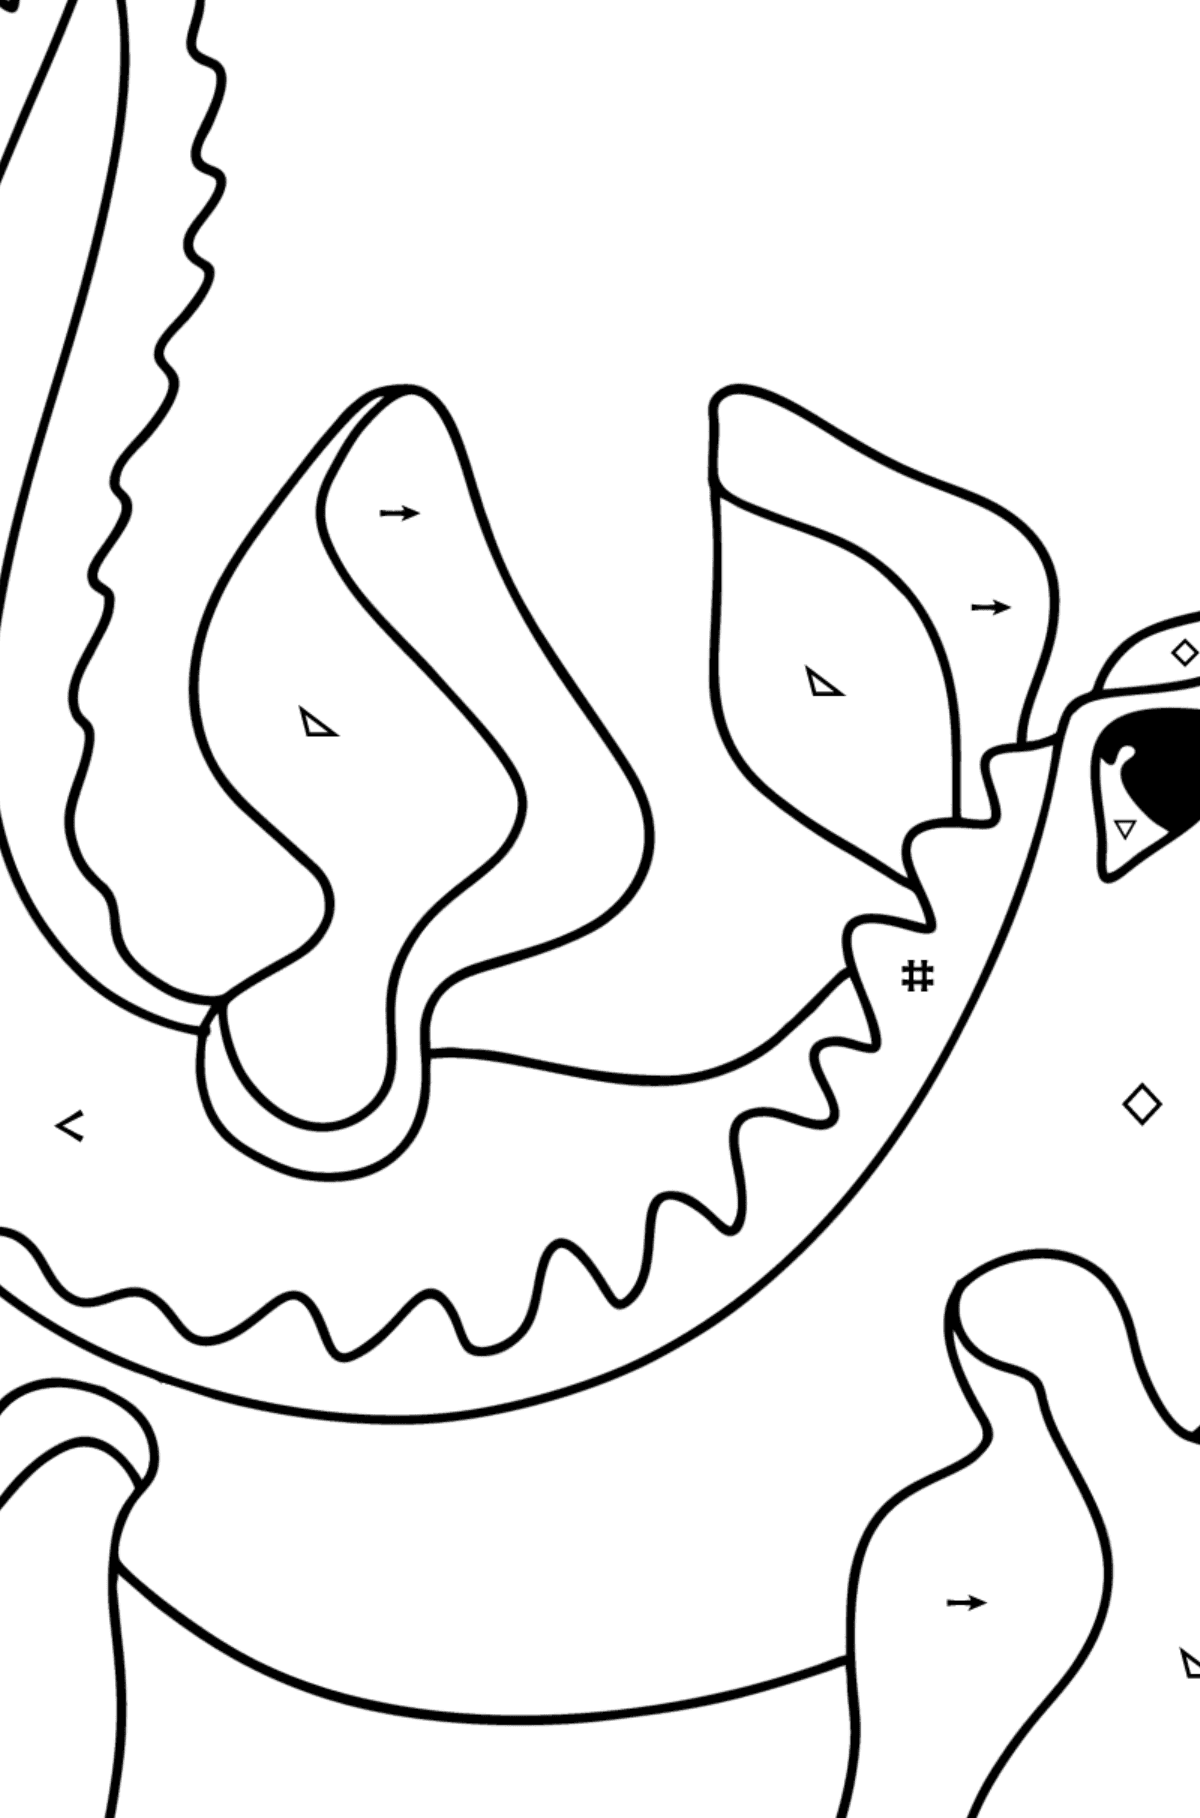 Mosasaurus coloring page - Coloring by Symbols and Geometric Shapes for Kids